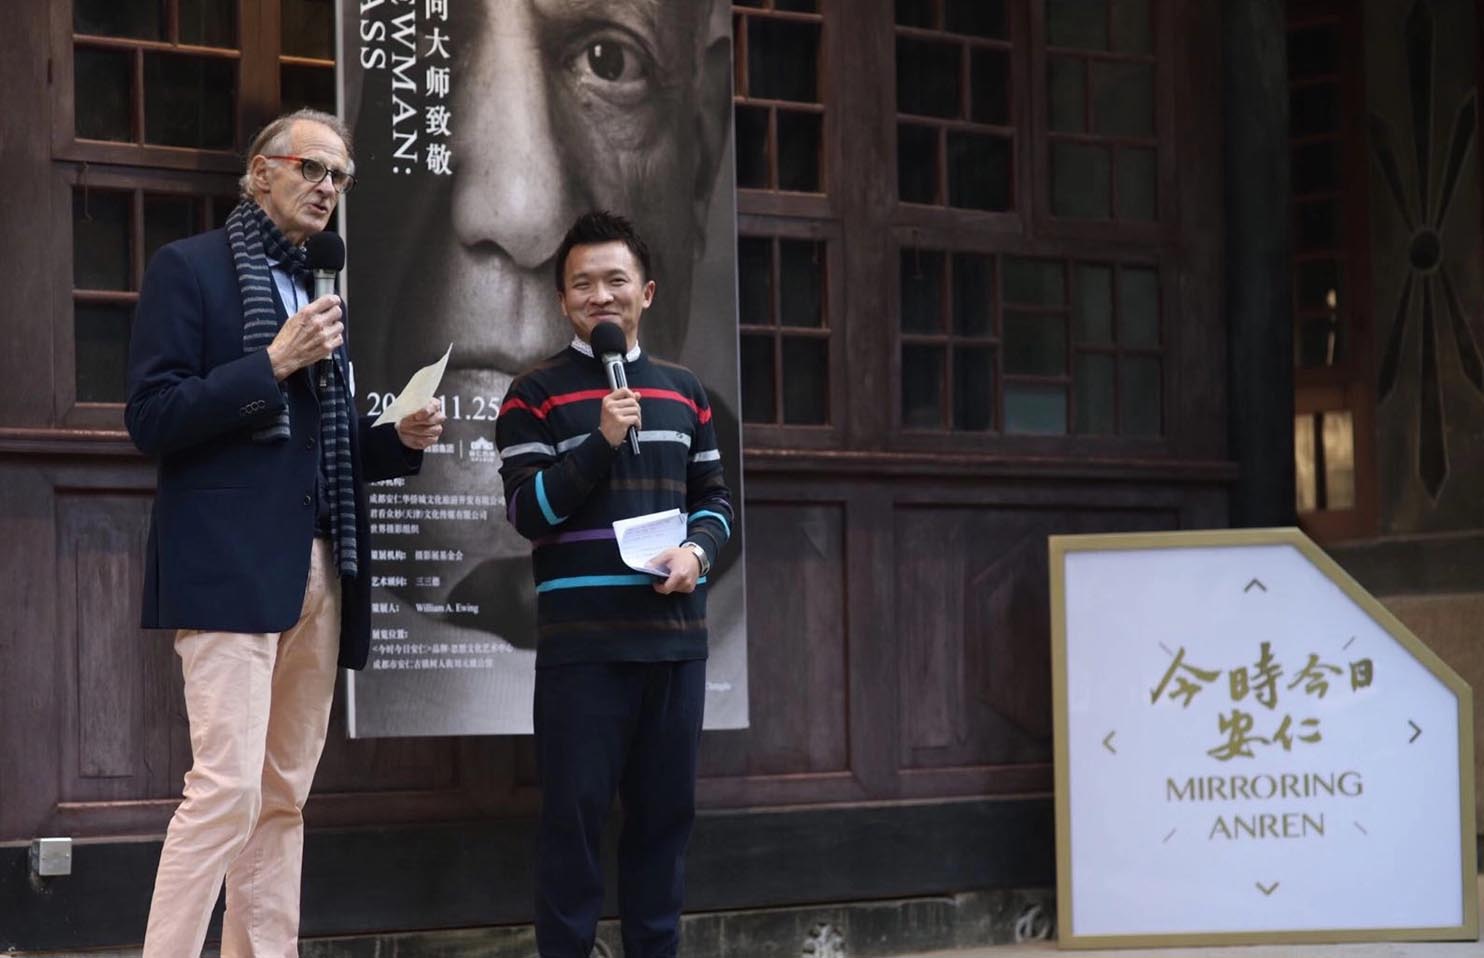 Curator William A. Ewing at the opening of the exhibition in Chengdu